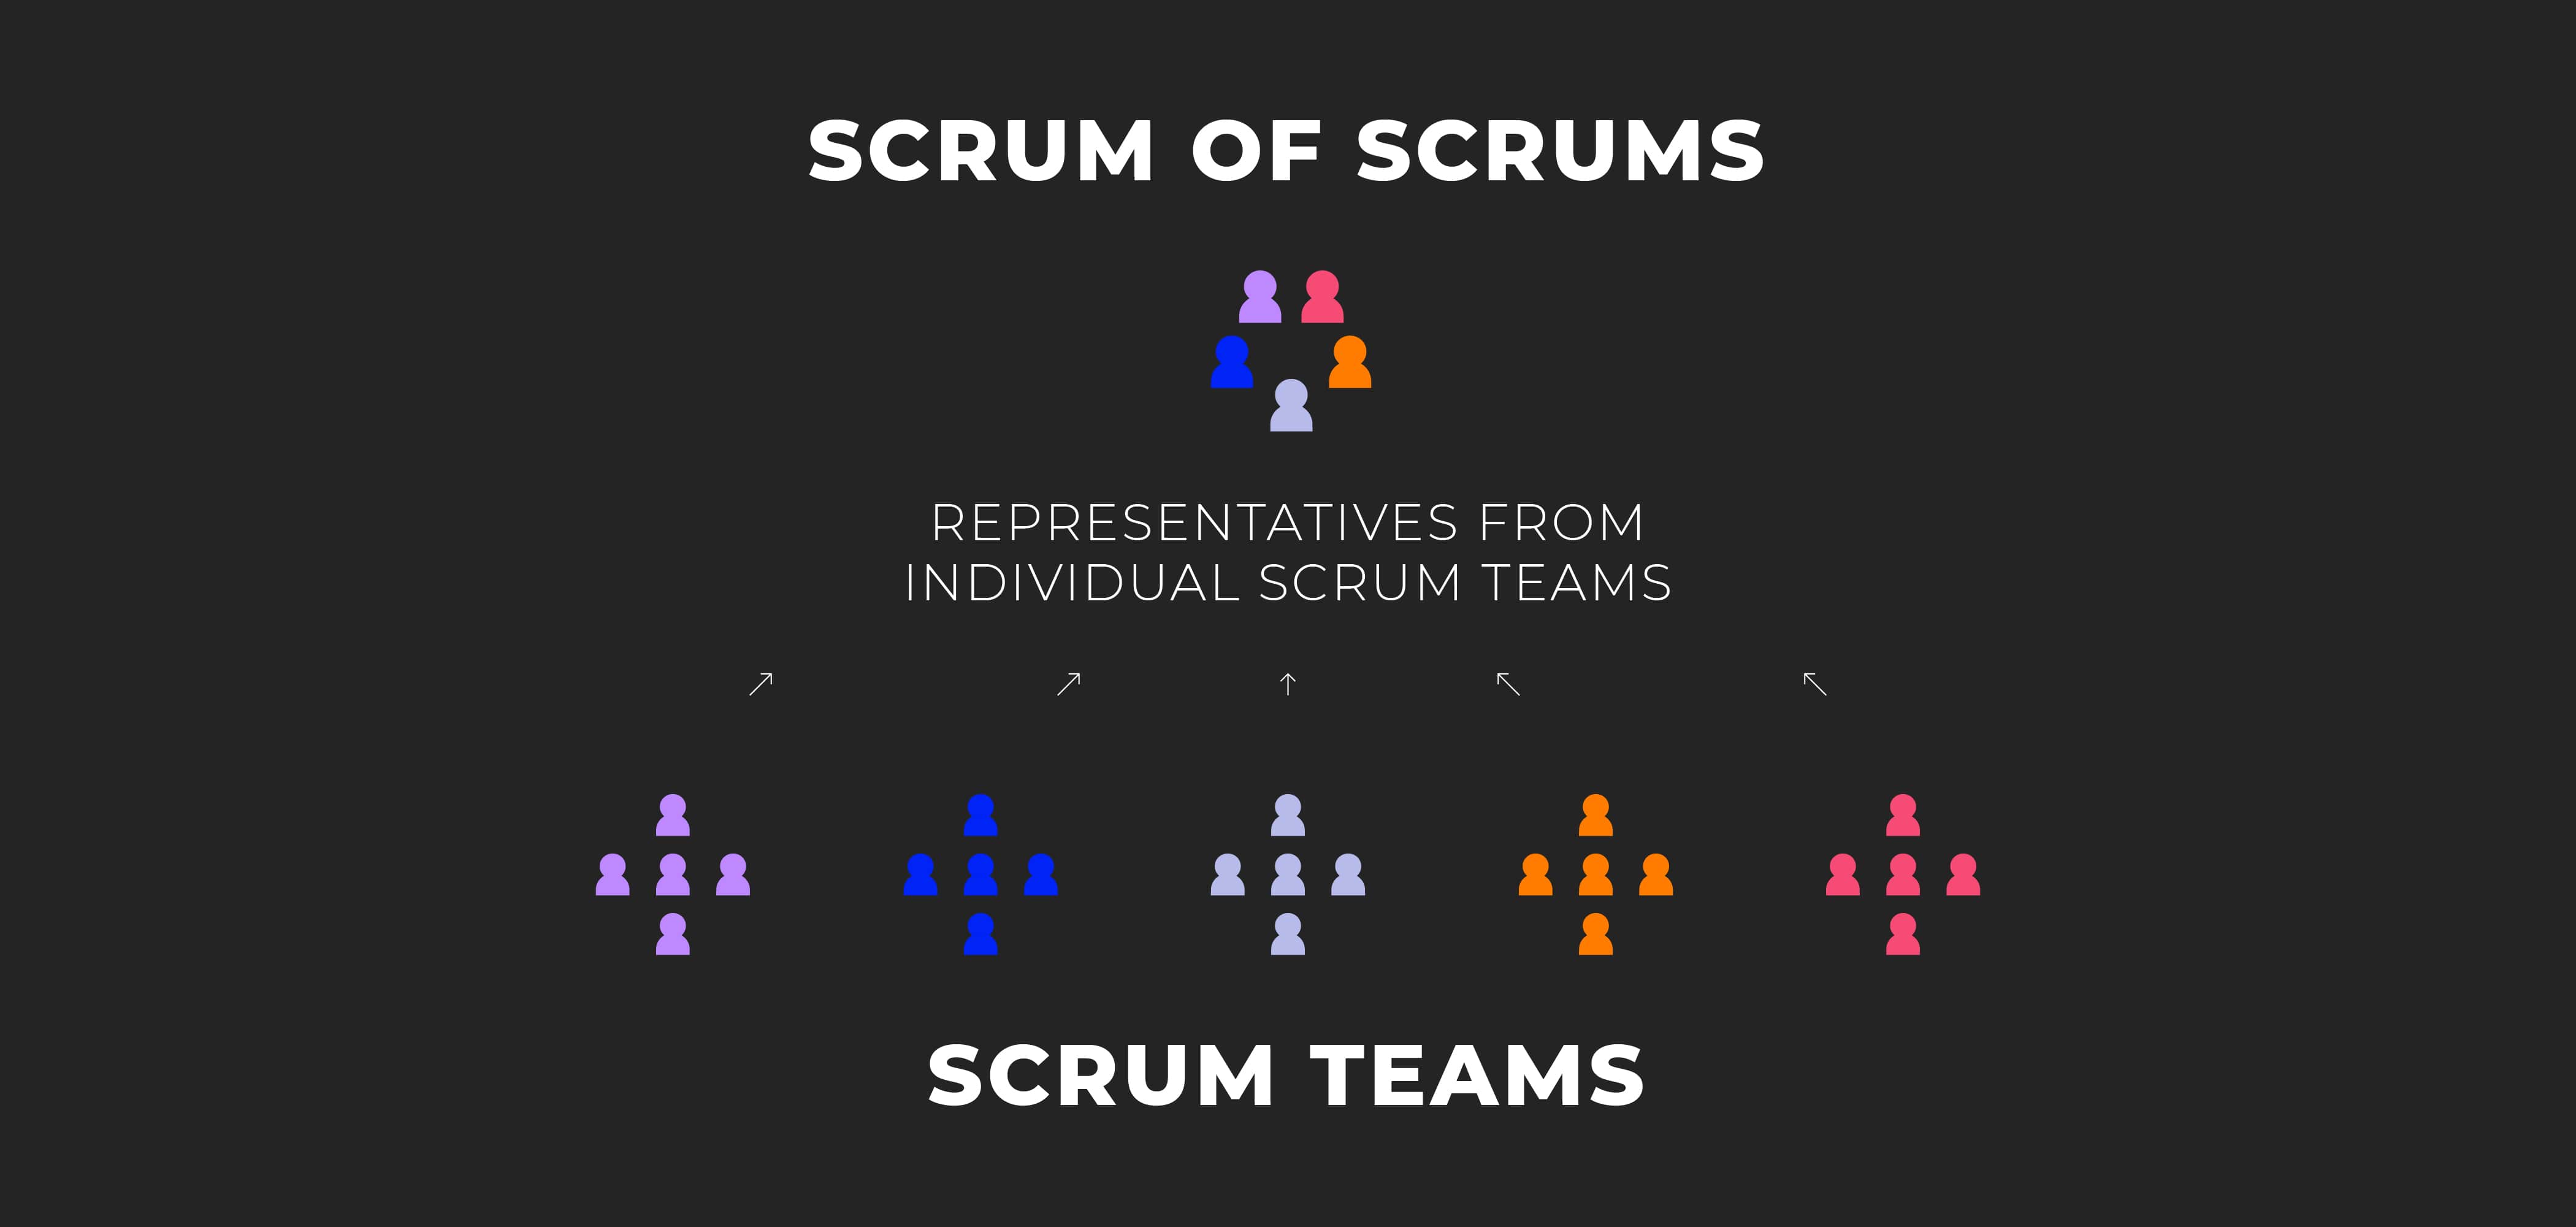 Scrum of Scrums can be considered as a fractal framework